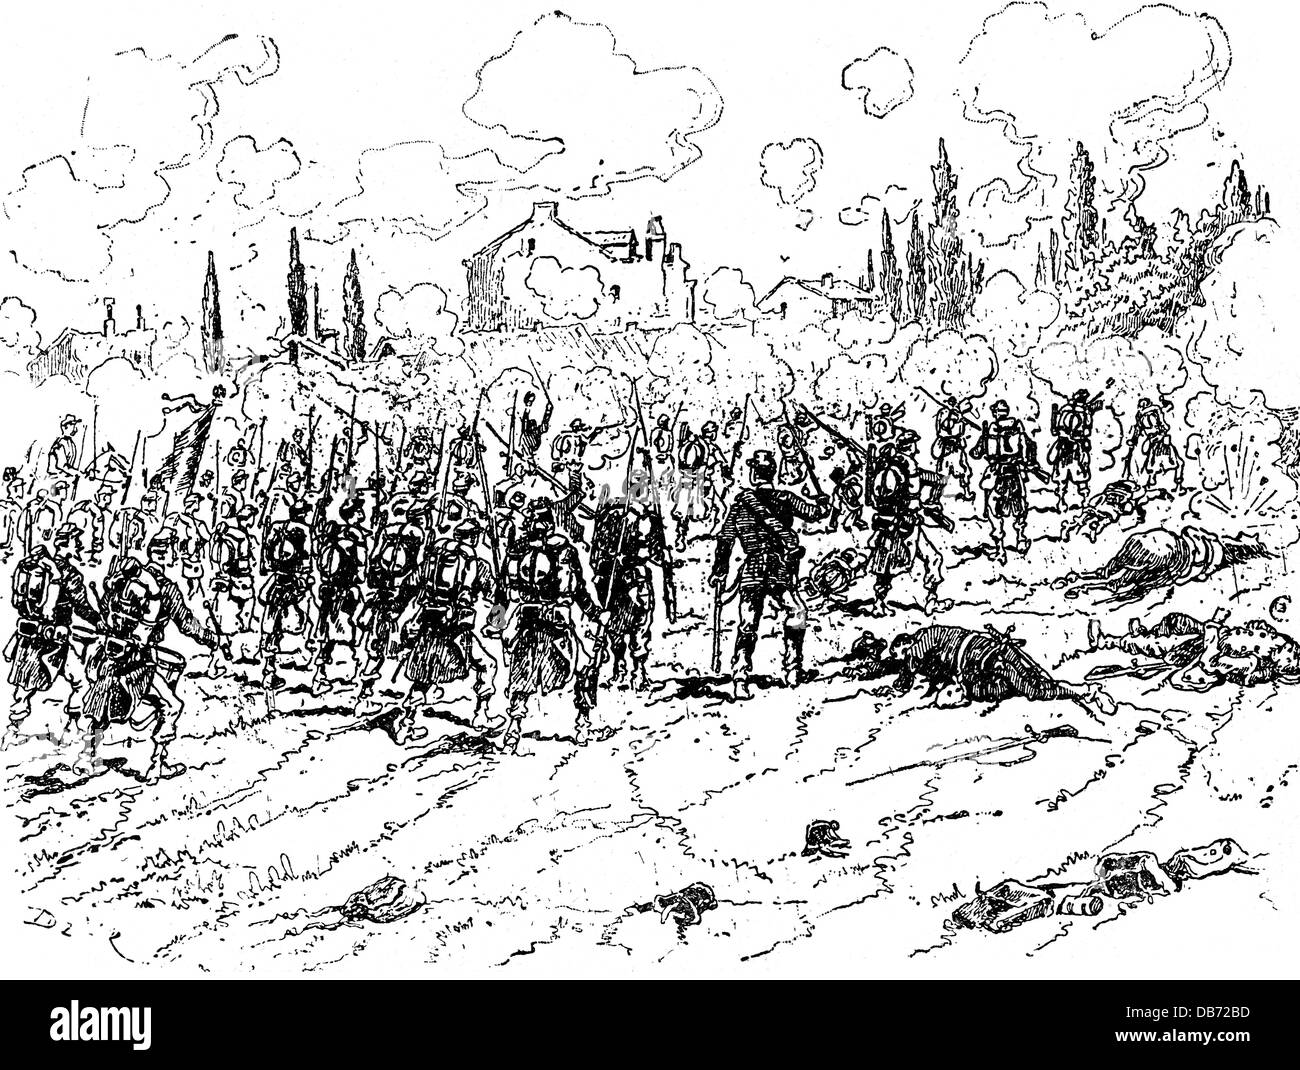 events, Franco-Prussia War 1870 - 1871, Battle of Mars-la-Tour, 16.8.1870, the French II Army Corps attacking Vionville, wood engraving after drawing, 19th century, Franco - Prussian War, Mars la tour, soldiers, attack, charge, infantry, Champagne, France, historic, historical, people, Additional-Rights-Clearences-Not Available Stock Photo